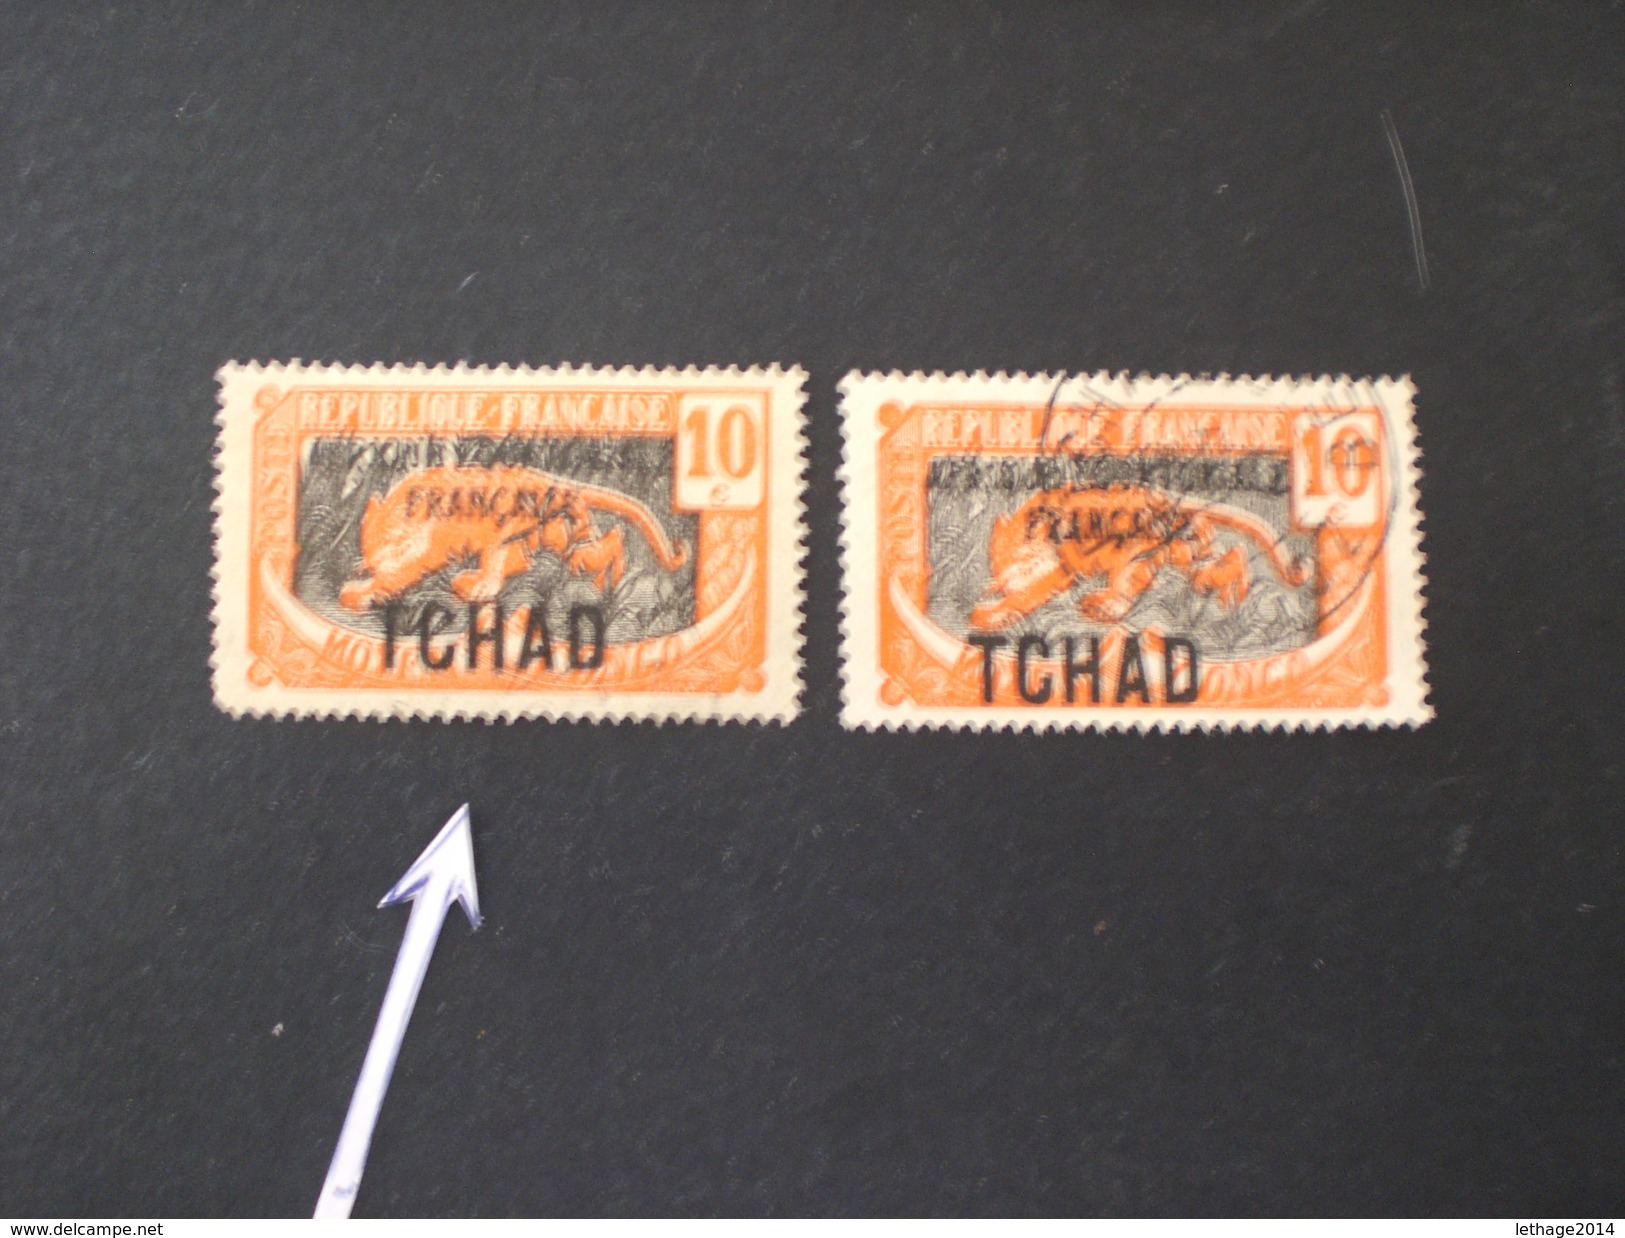 TCHAD CHAD 1925 Panthere Overprinted "AFRIQUE EQUATORIALE FRANCAISE" Color Error Is Not Gray But Black - Usados